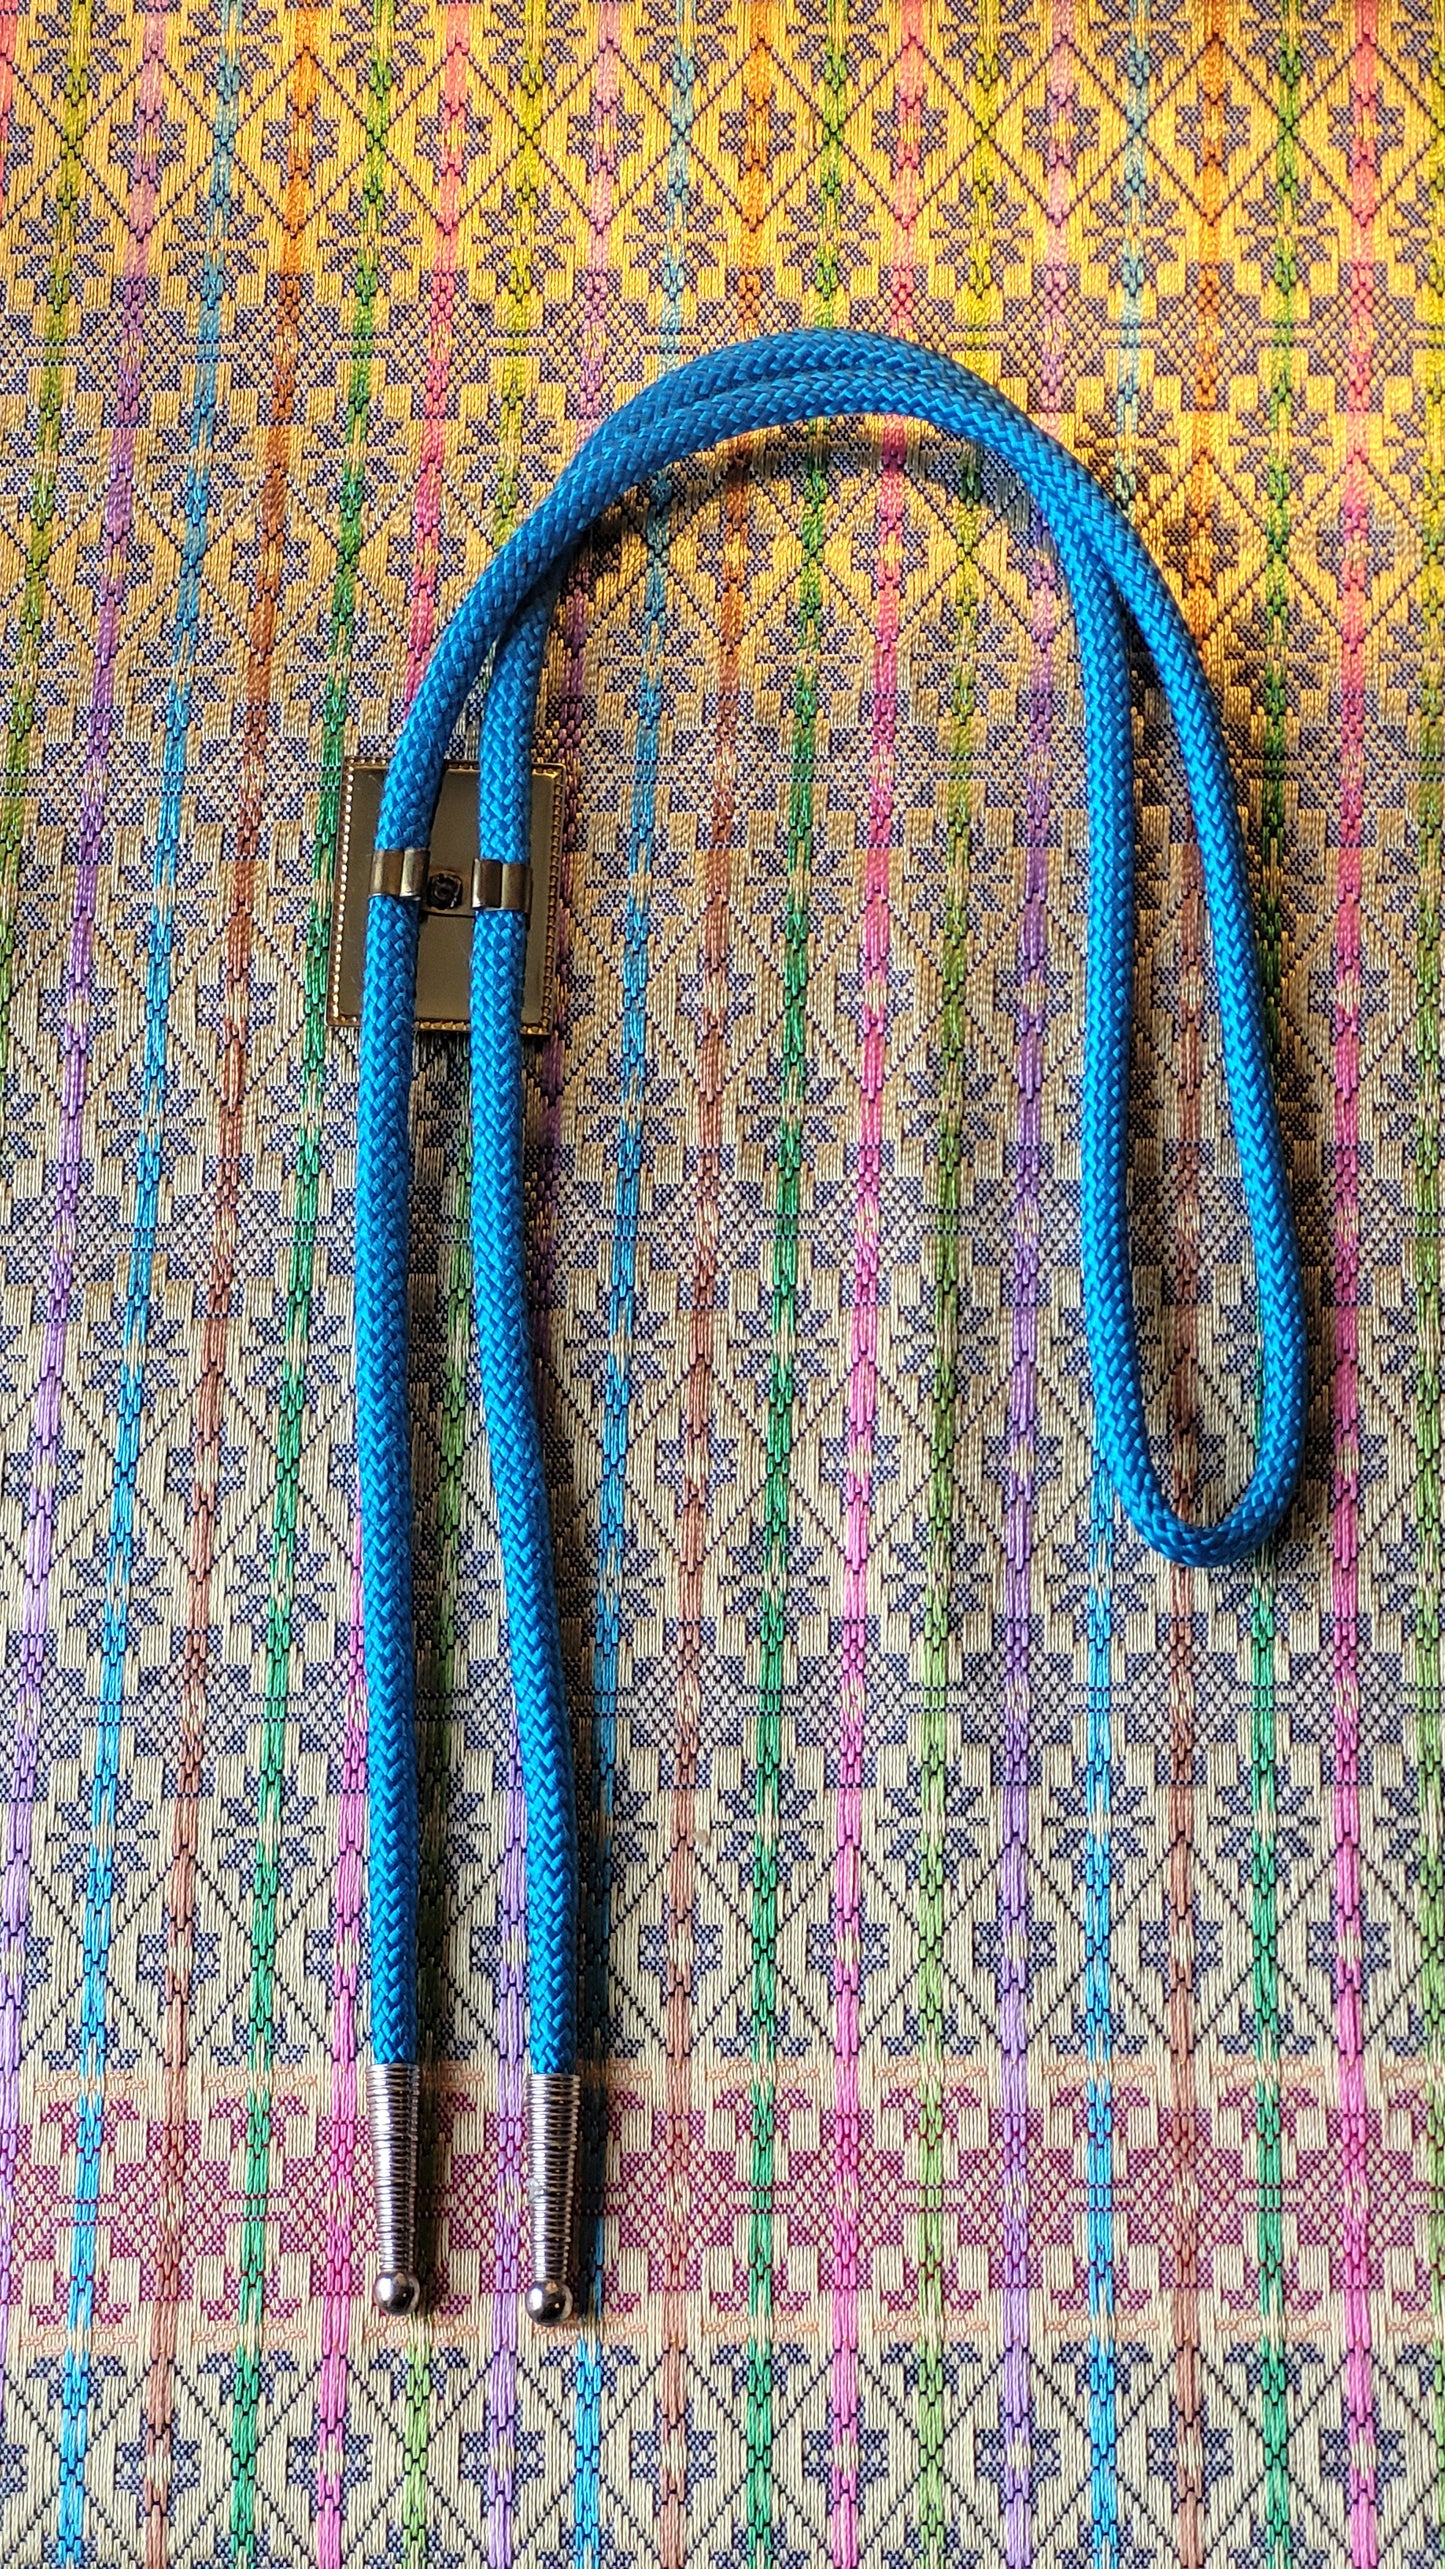 Saddle with Turquoise Cord Bolo Tie